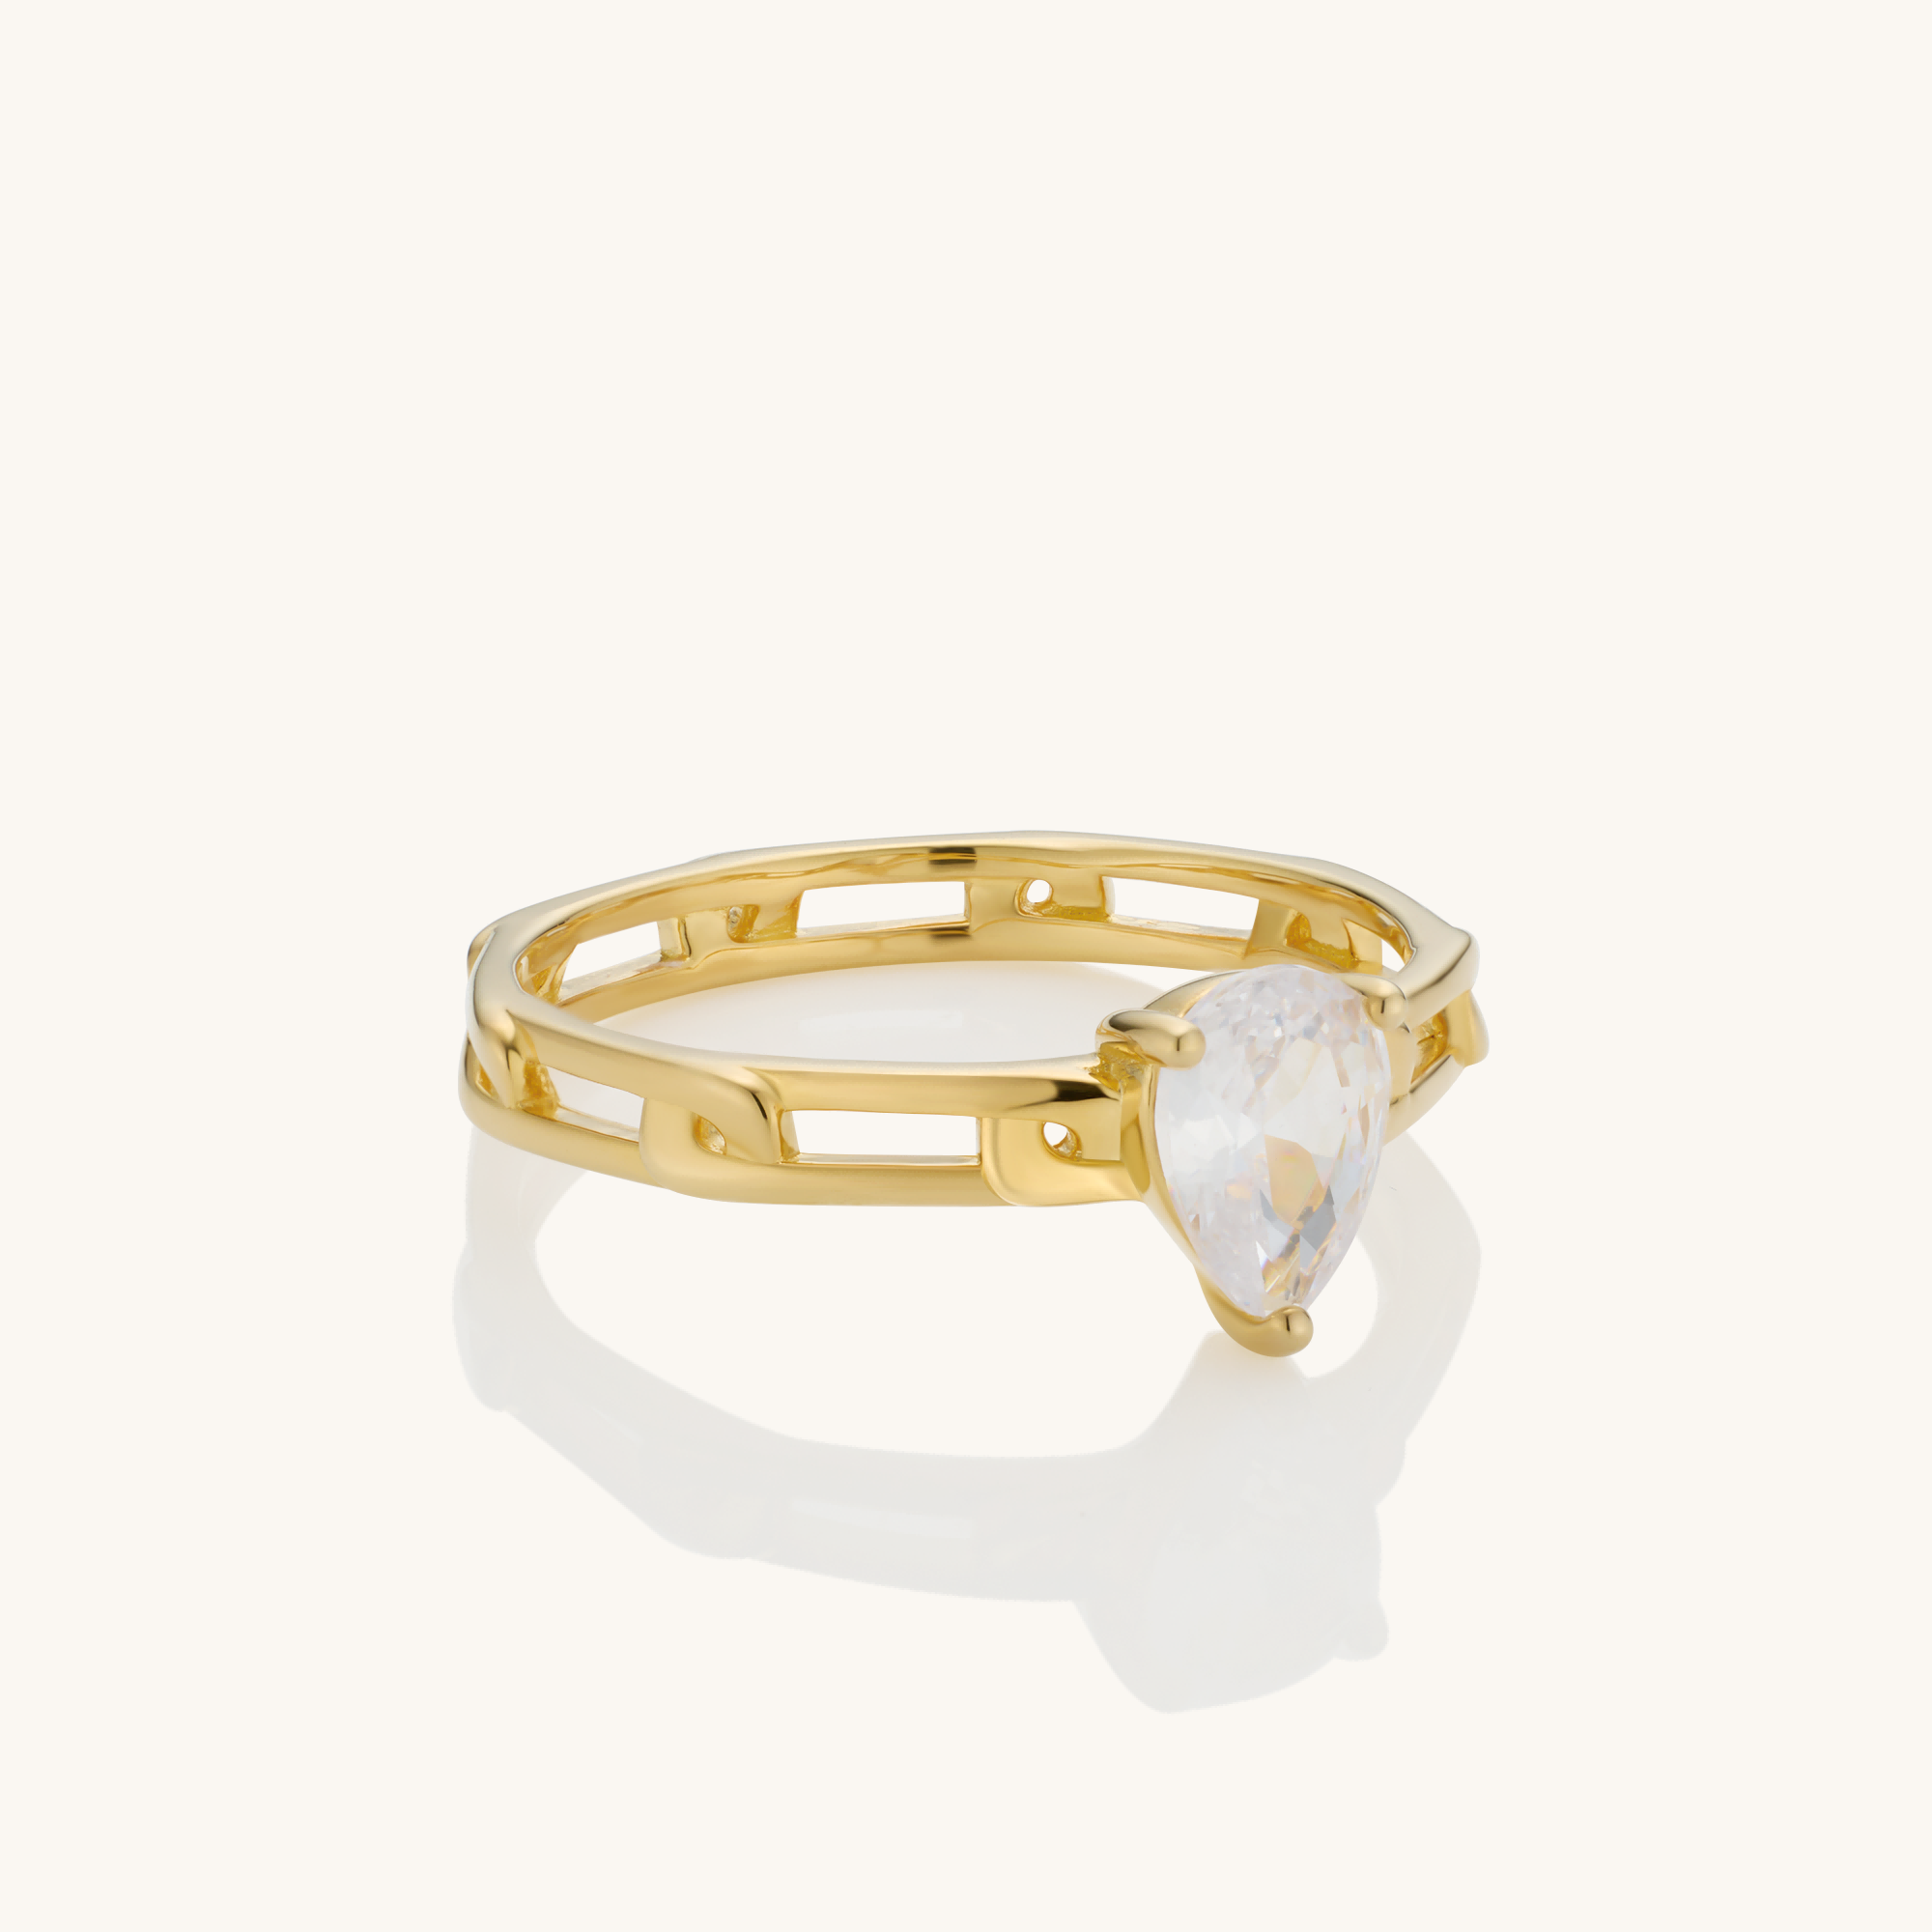 Luck in Love Solitaire Braided Ring - Kira LaLa